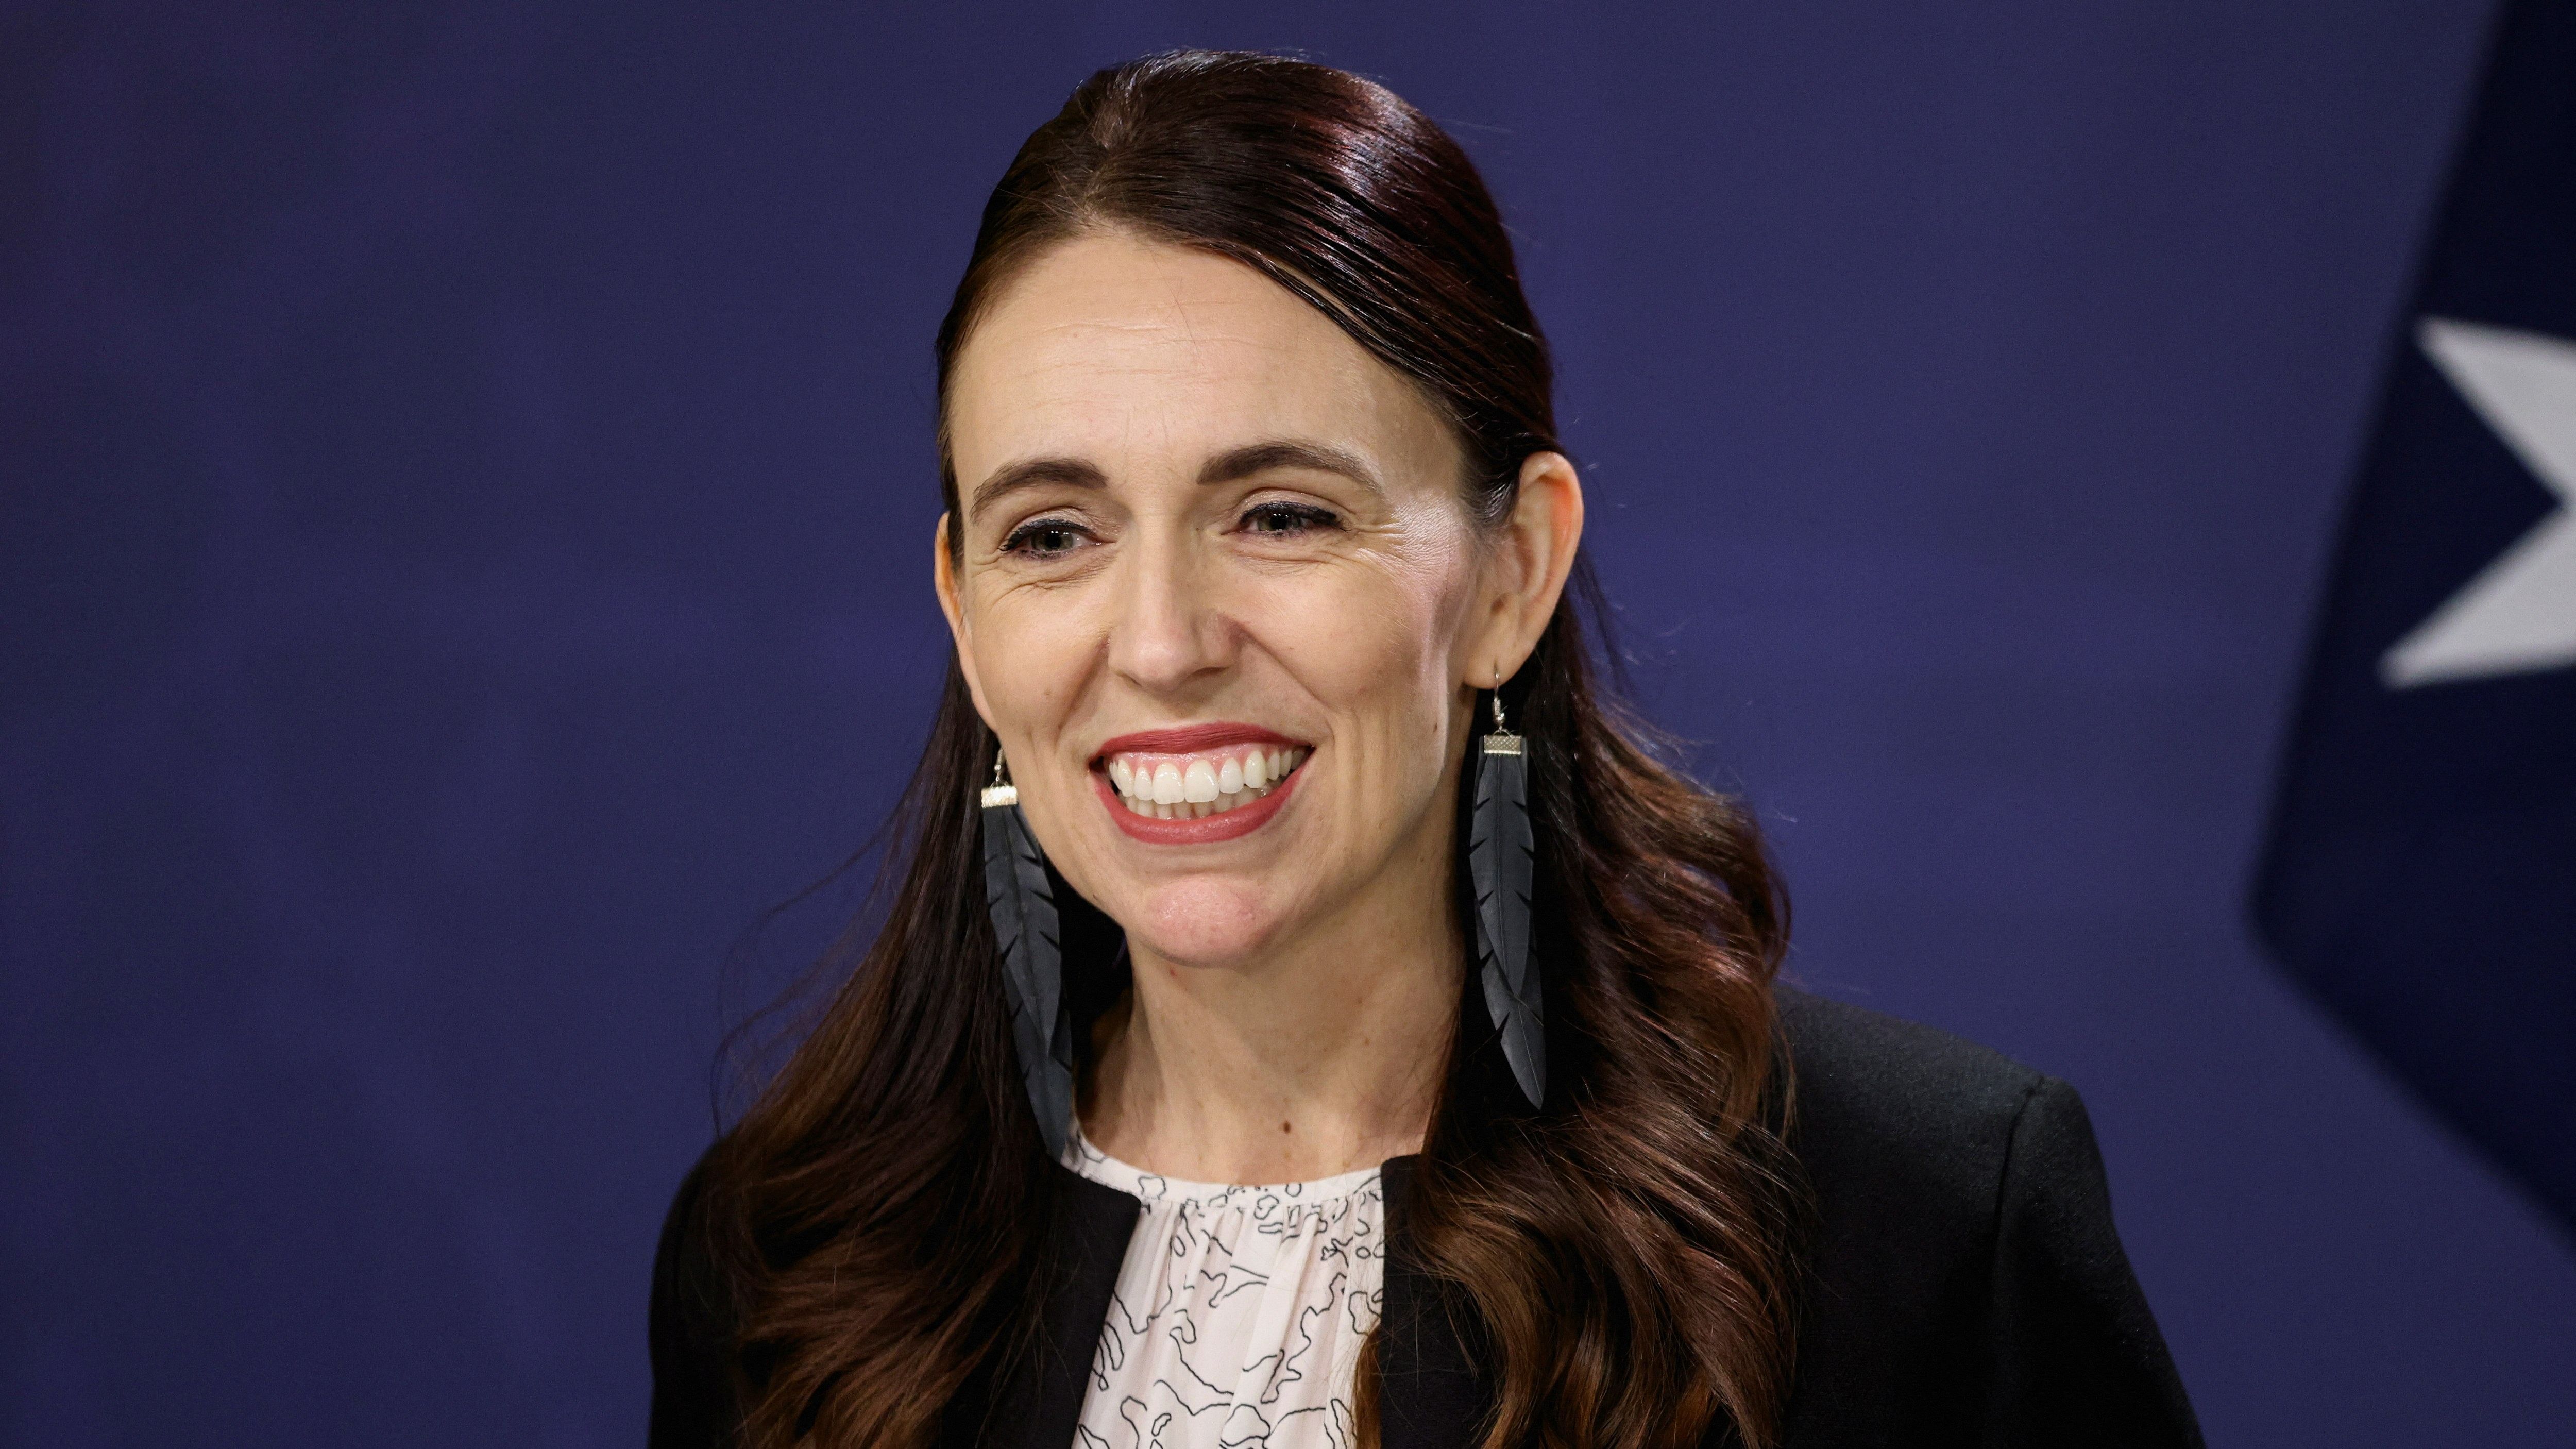 Over the past few years, artists have depicted Ardern as Wonder Woman and as pop cultural figures like Star Wars’ Princess Leia or Rosie the Riveter from WWII marketing imagery. Credit: Reuters Photo 